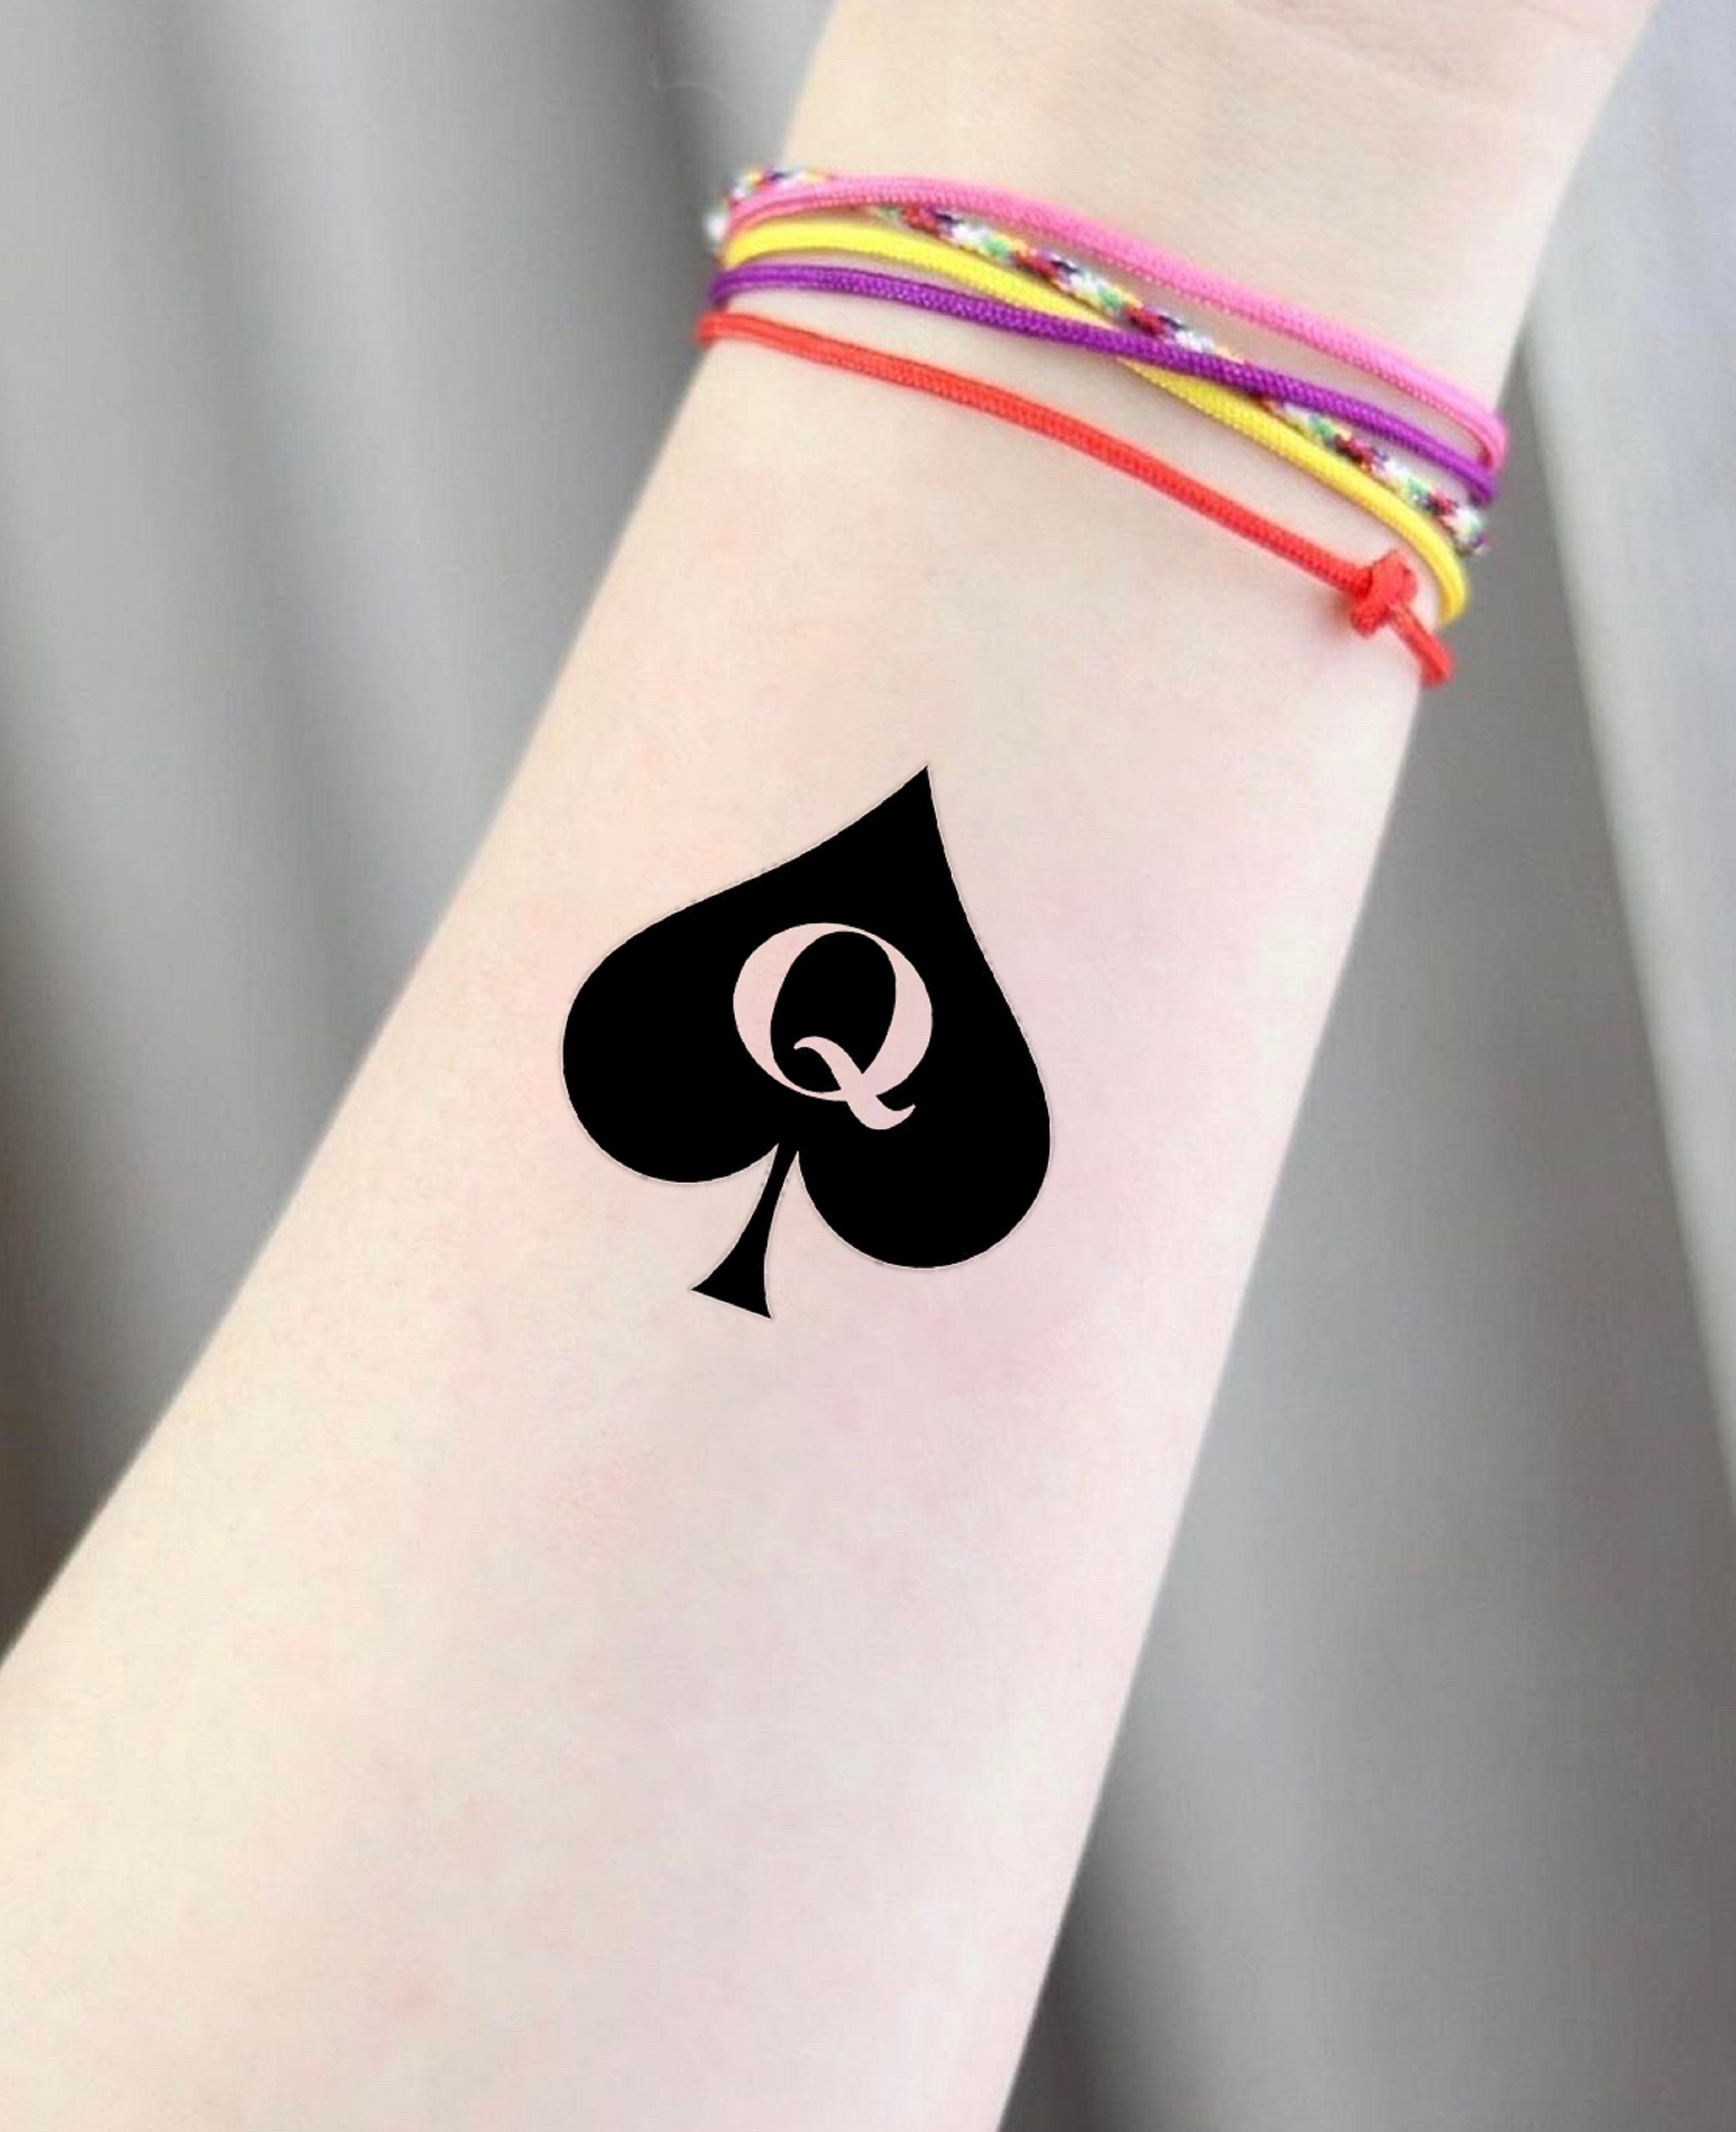 amber twitty recommends Queen Of Spades Tat